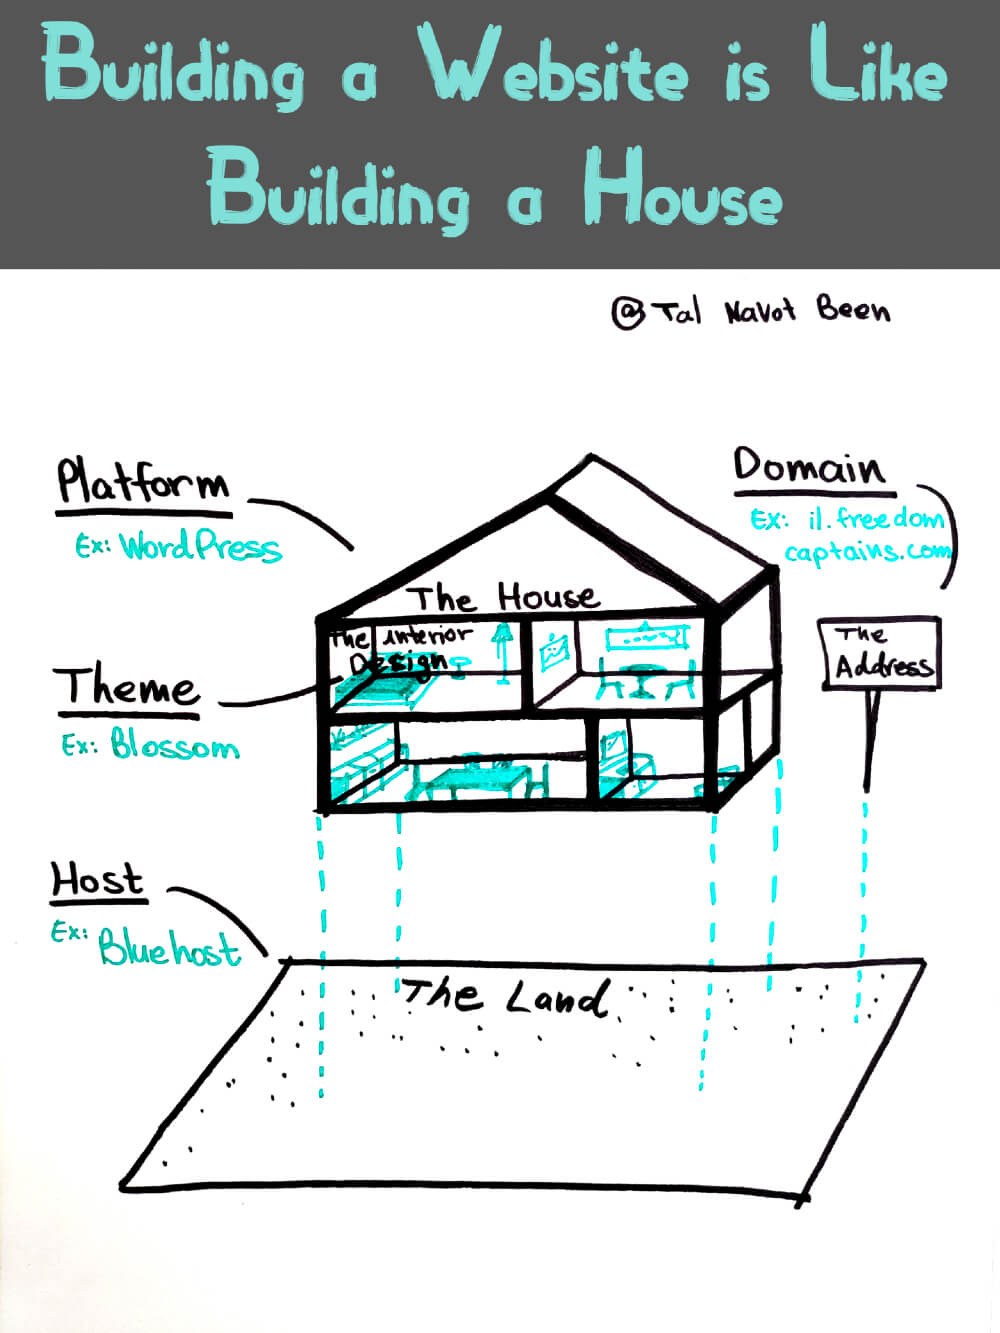 Building a Website is like Building a House